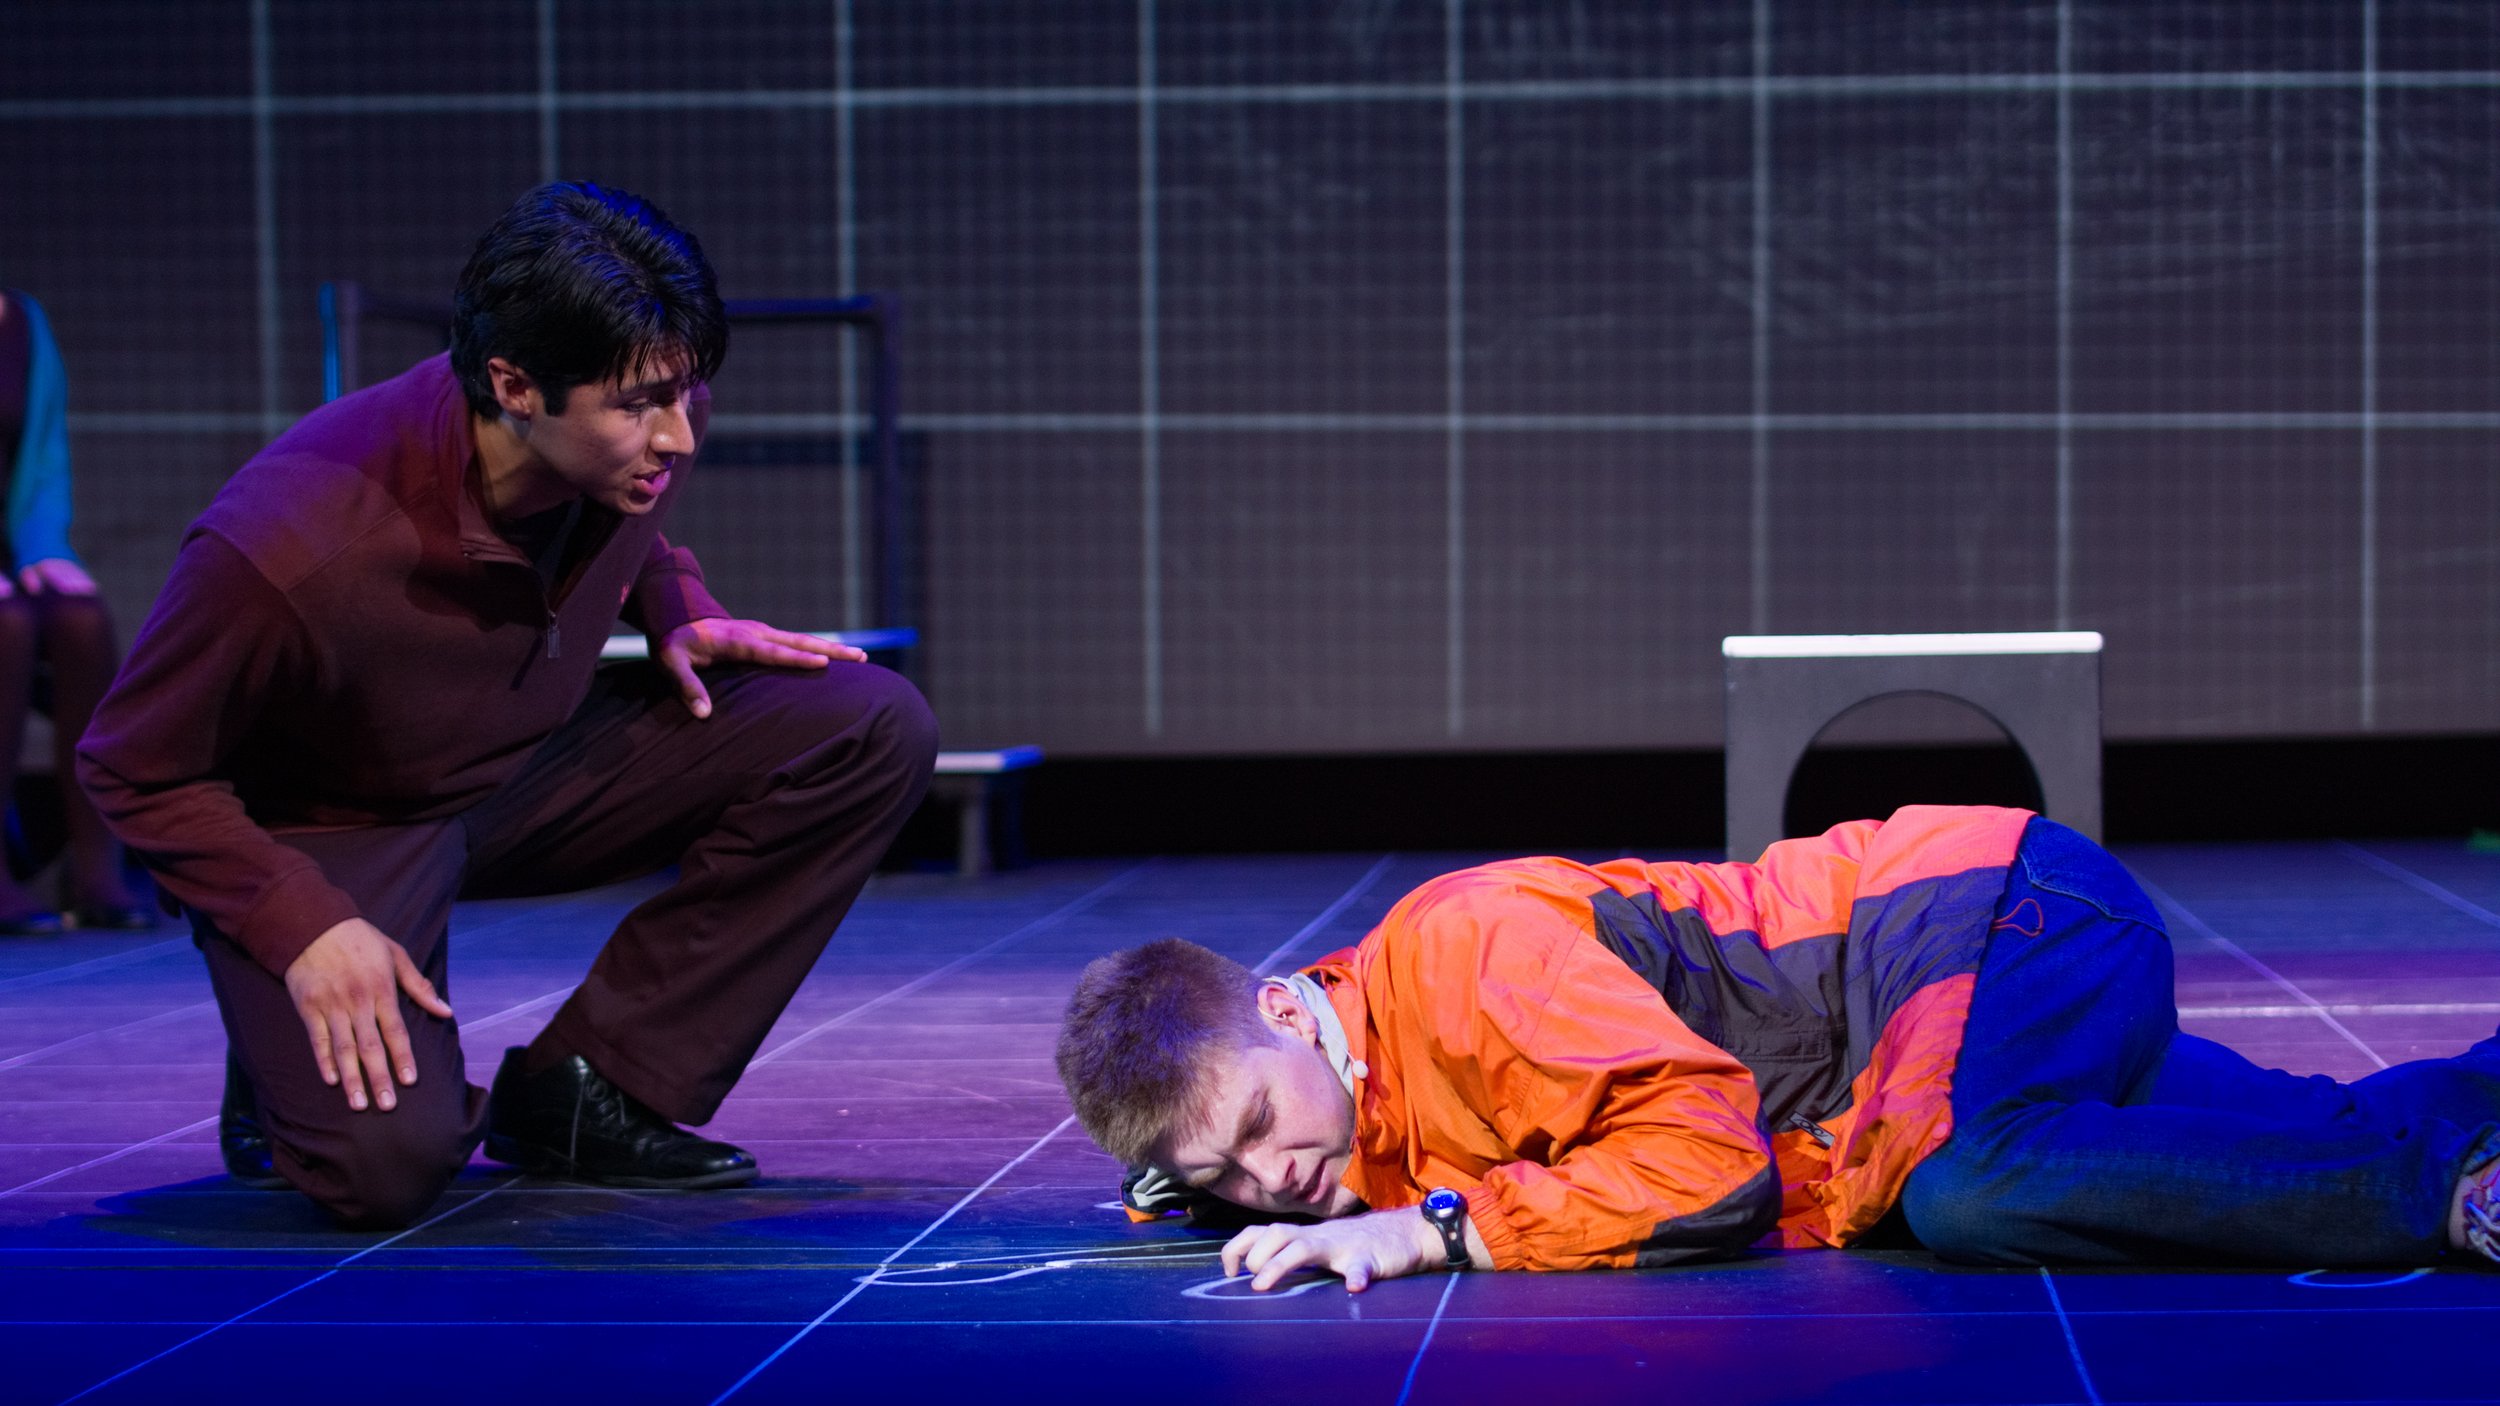  Steve Whittle (left) and Justin Valine (center) during last dress rehearsal before the first showing of "The Curious Incident of The Dog in The Night-Time" on Thursday, October 7th at Santa Monica College, Santa Monica, Calif. 